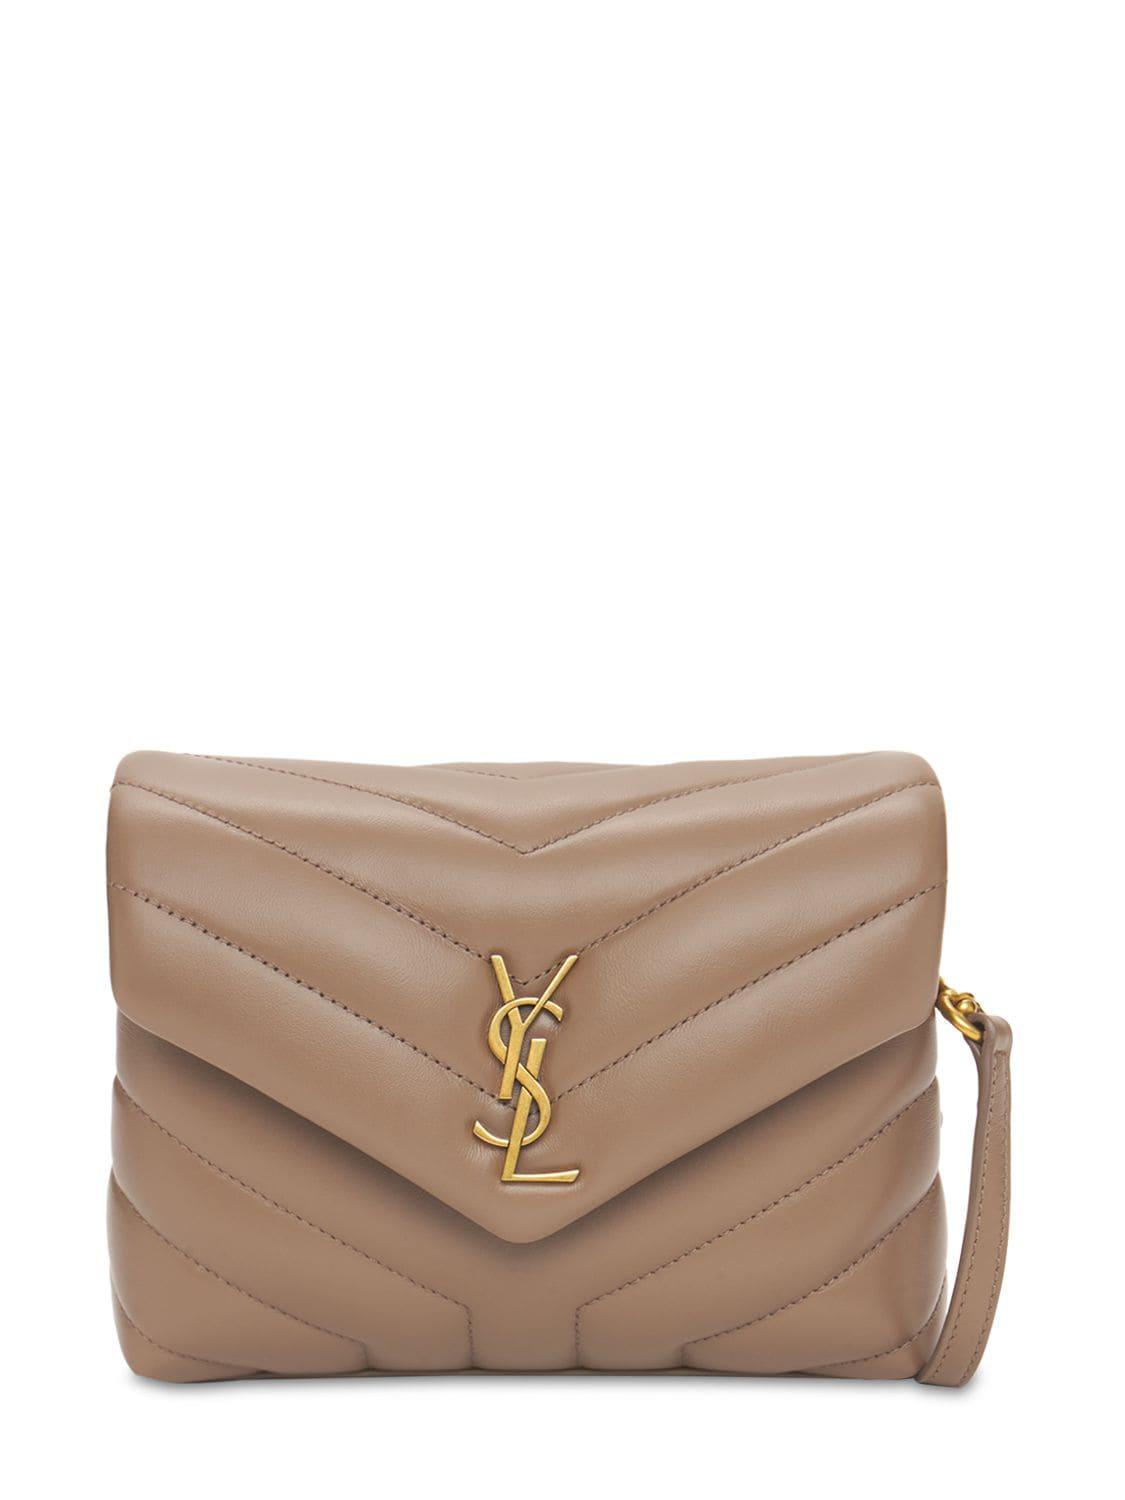 Saint Laurent Toy Loulou Monogram Leather Bag in Brown | Lyst